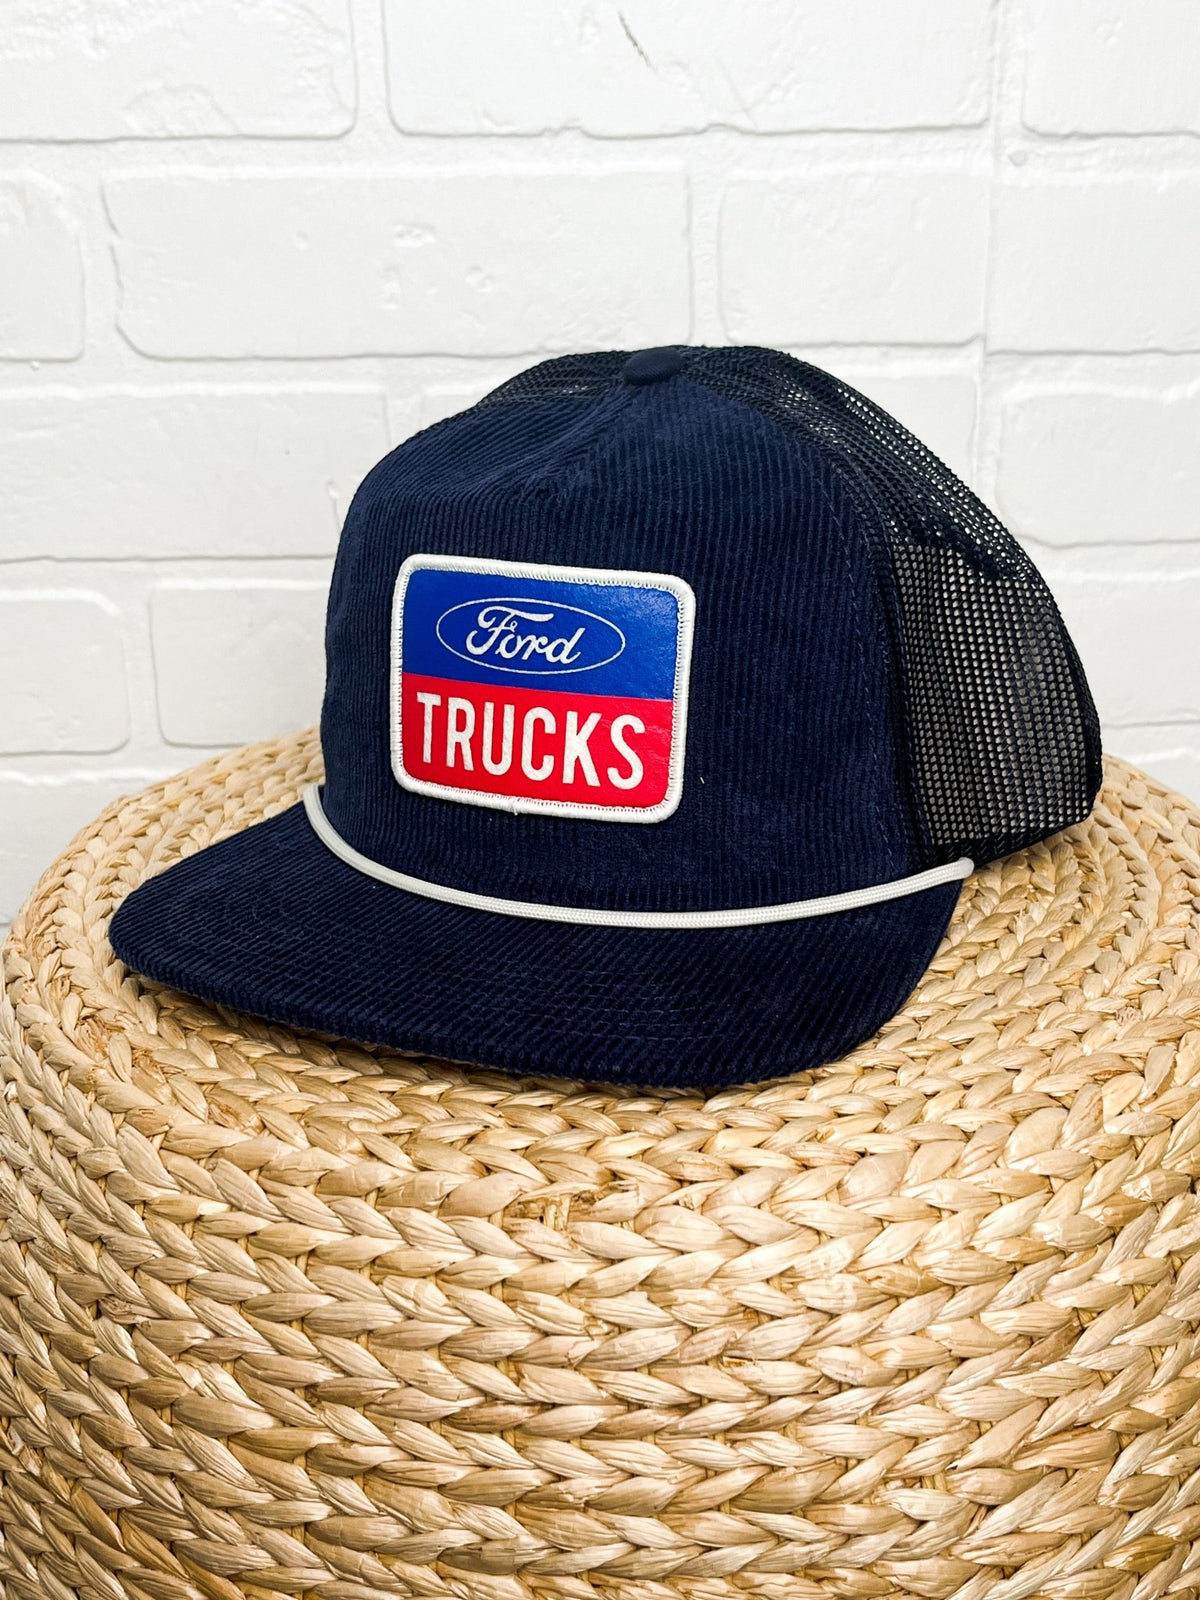 Ford mackie hat navy - Trendy Gifts at Lush Fashion Lounge Boutique in Oklahoma City